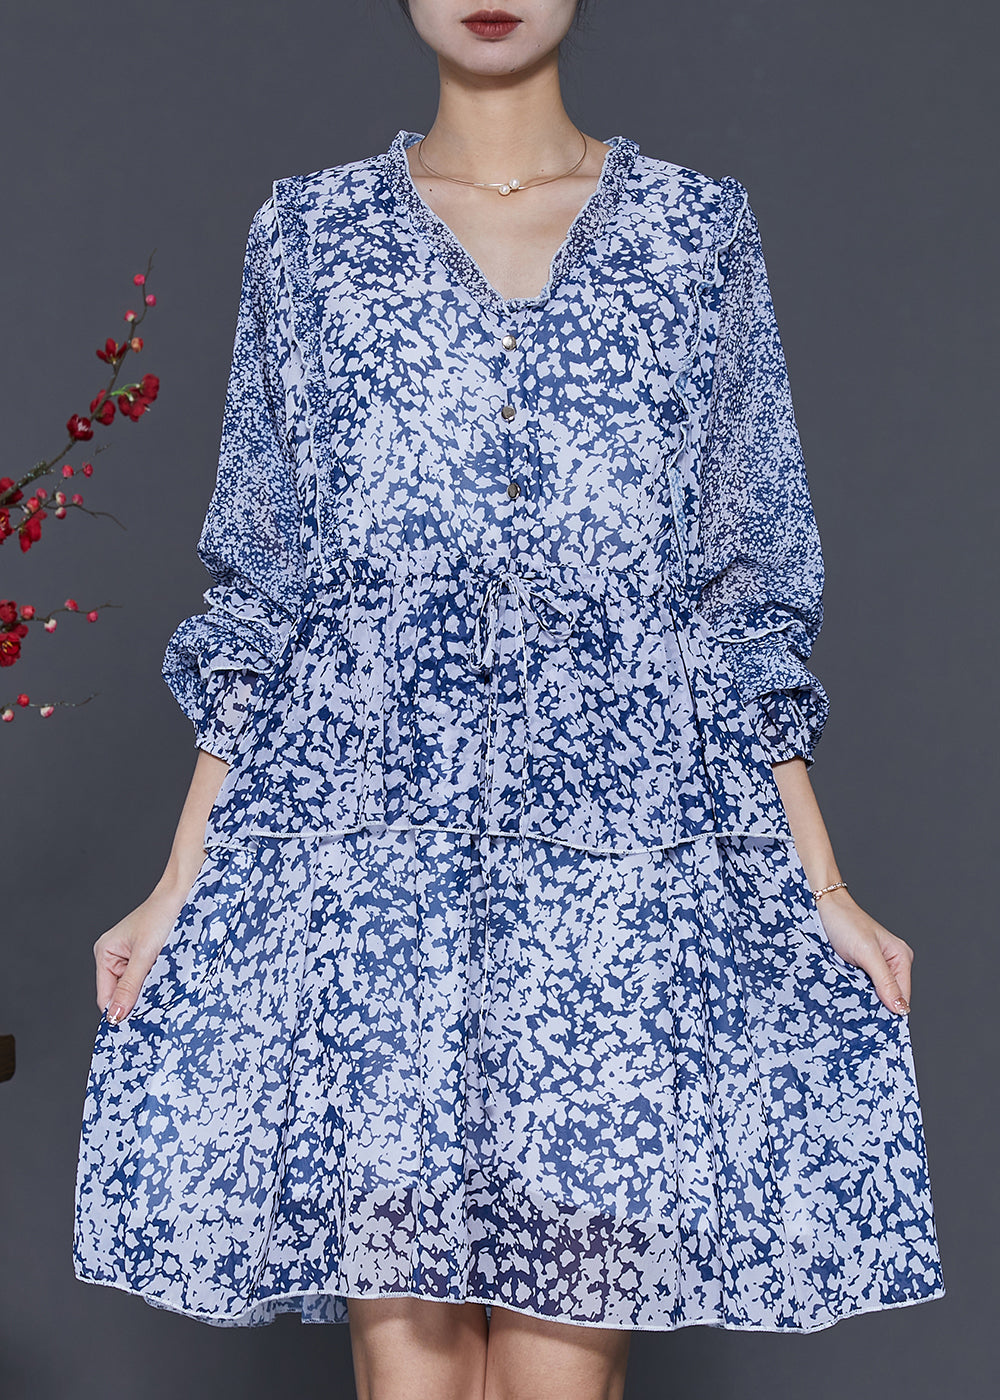 Style Blue Cinched Print Chiffon Vacation Dresses Spring